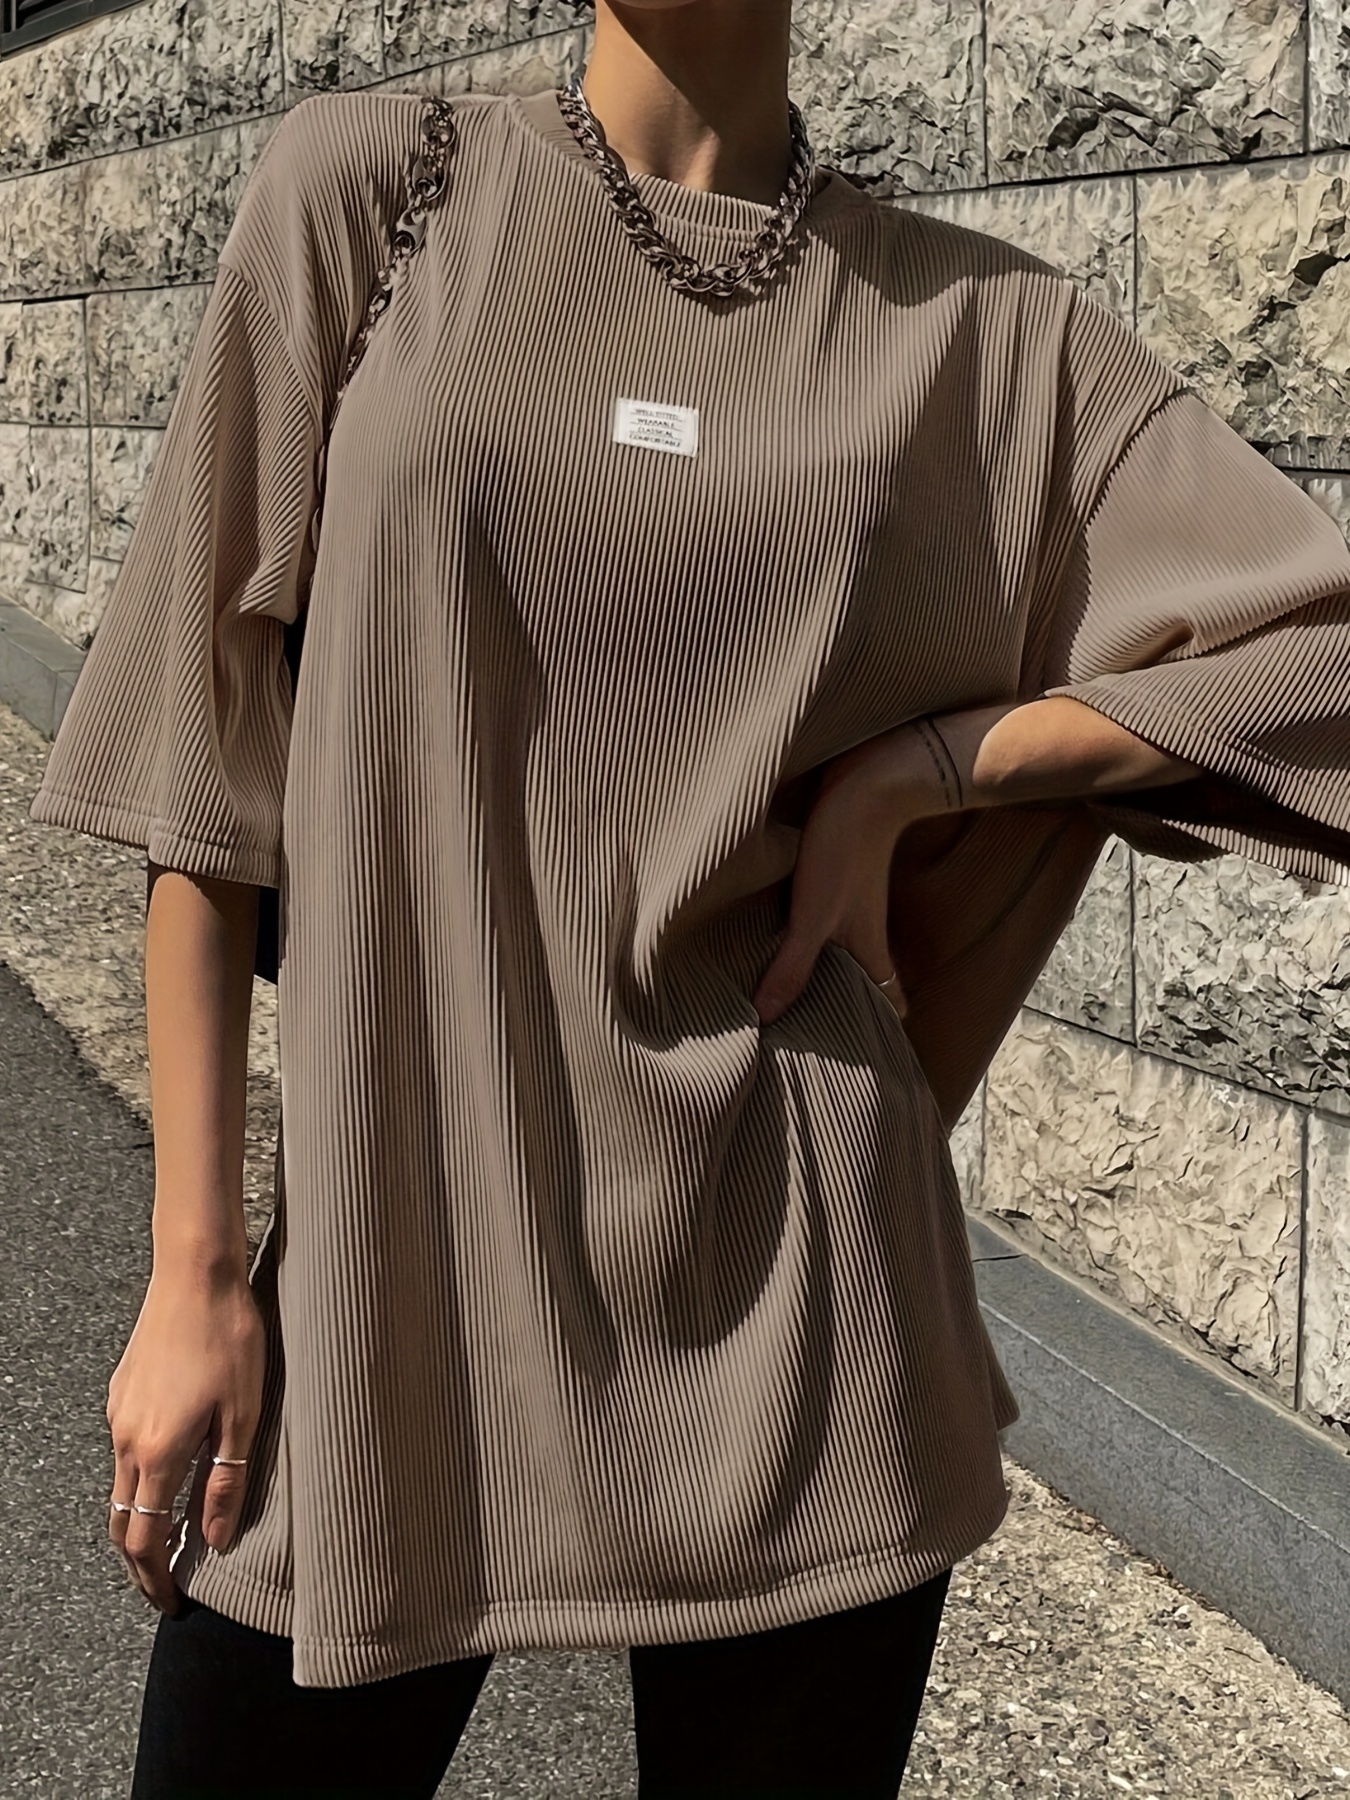 Crew-Neck T-shirt with Drop-Shoulder Sleeves